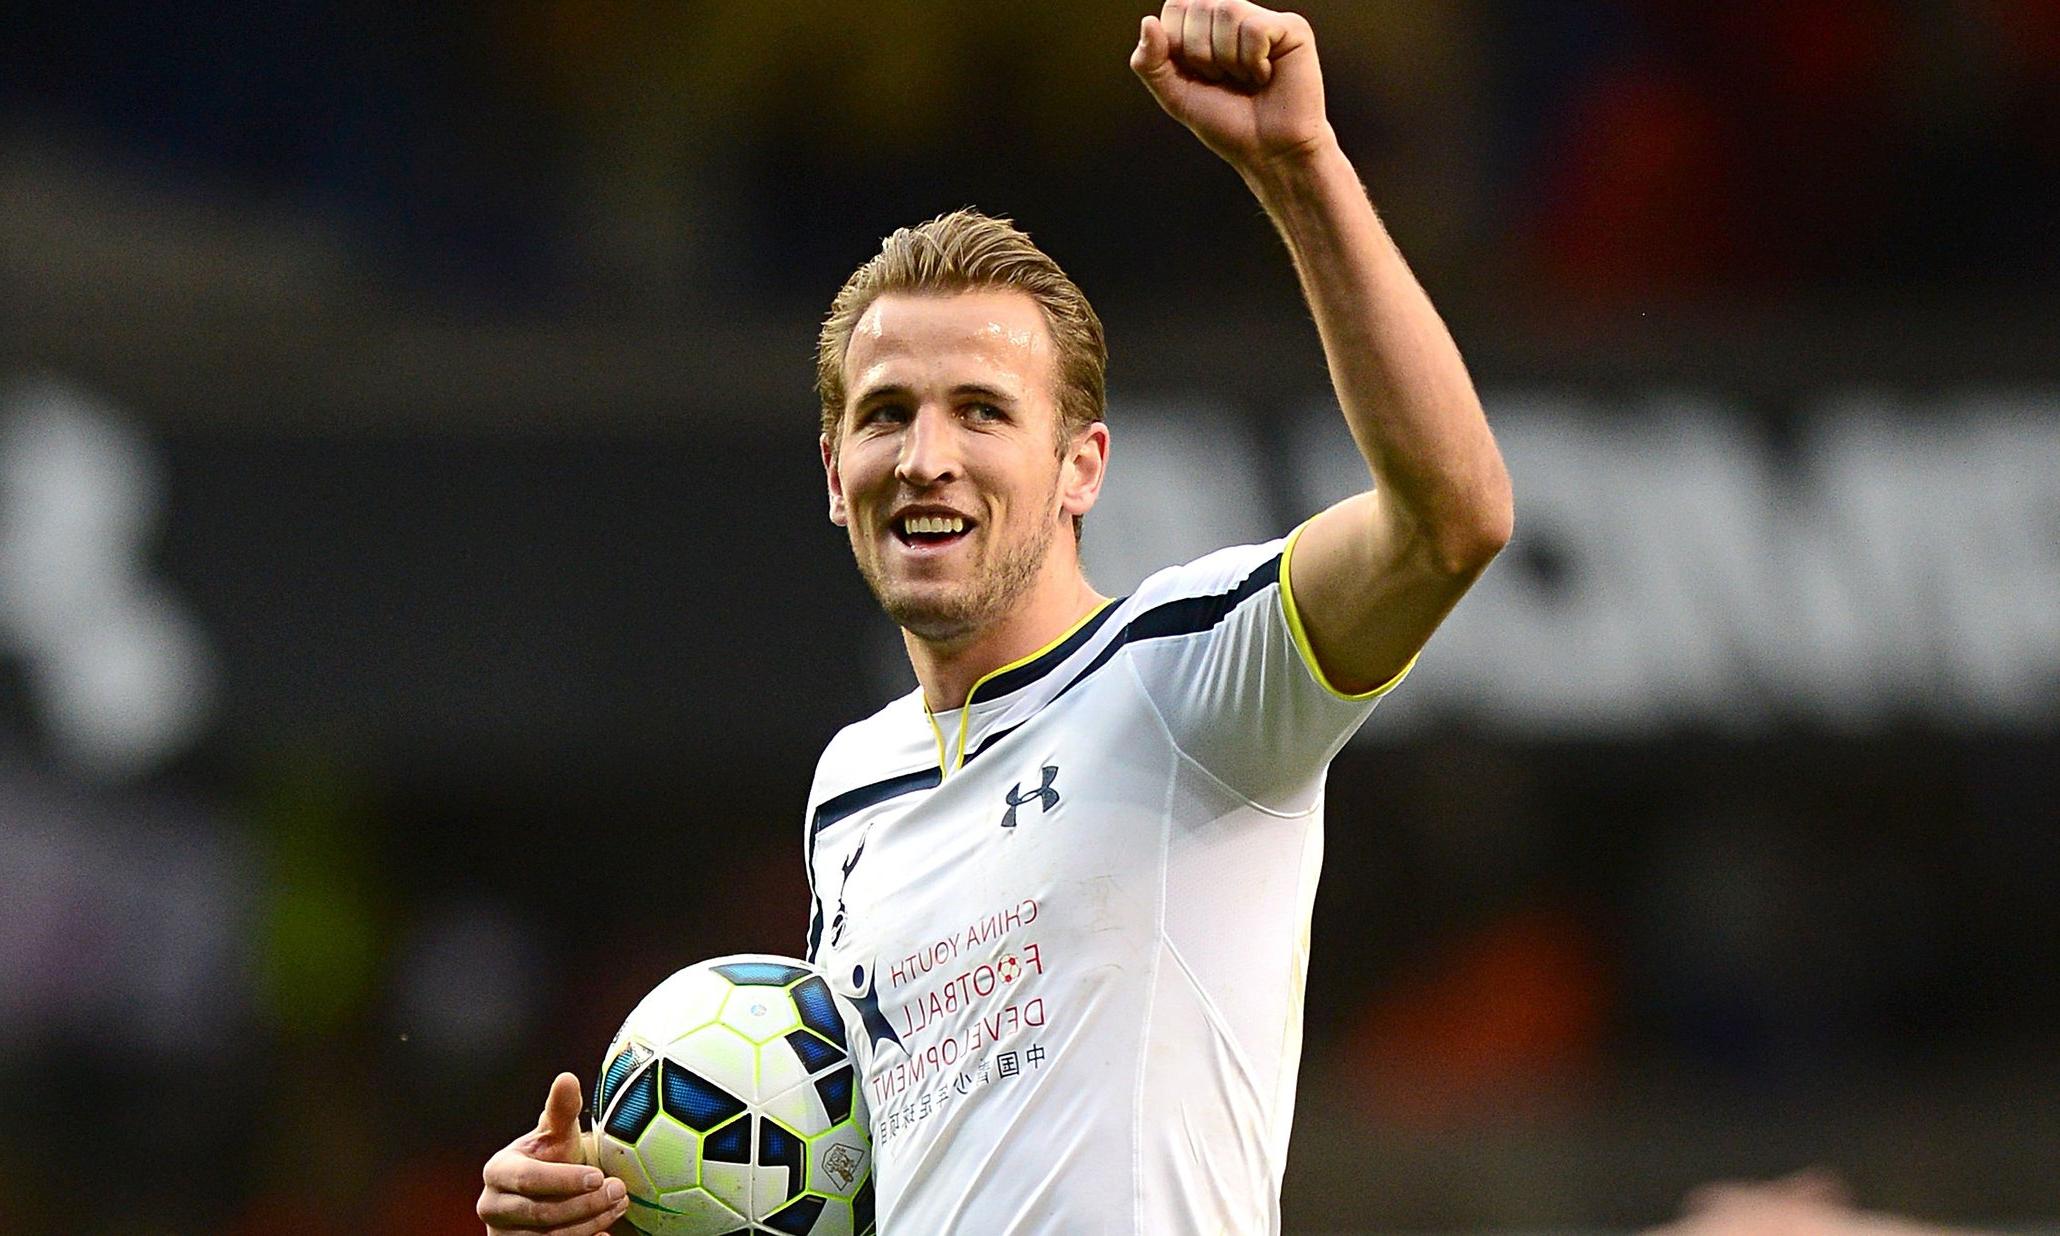 An Image of Harry Kane on the Football Field